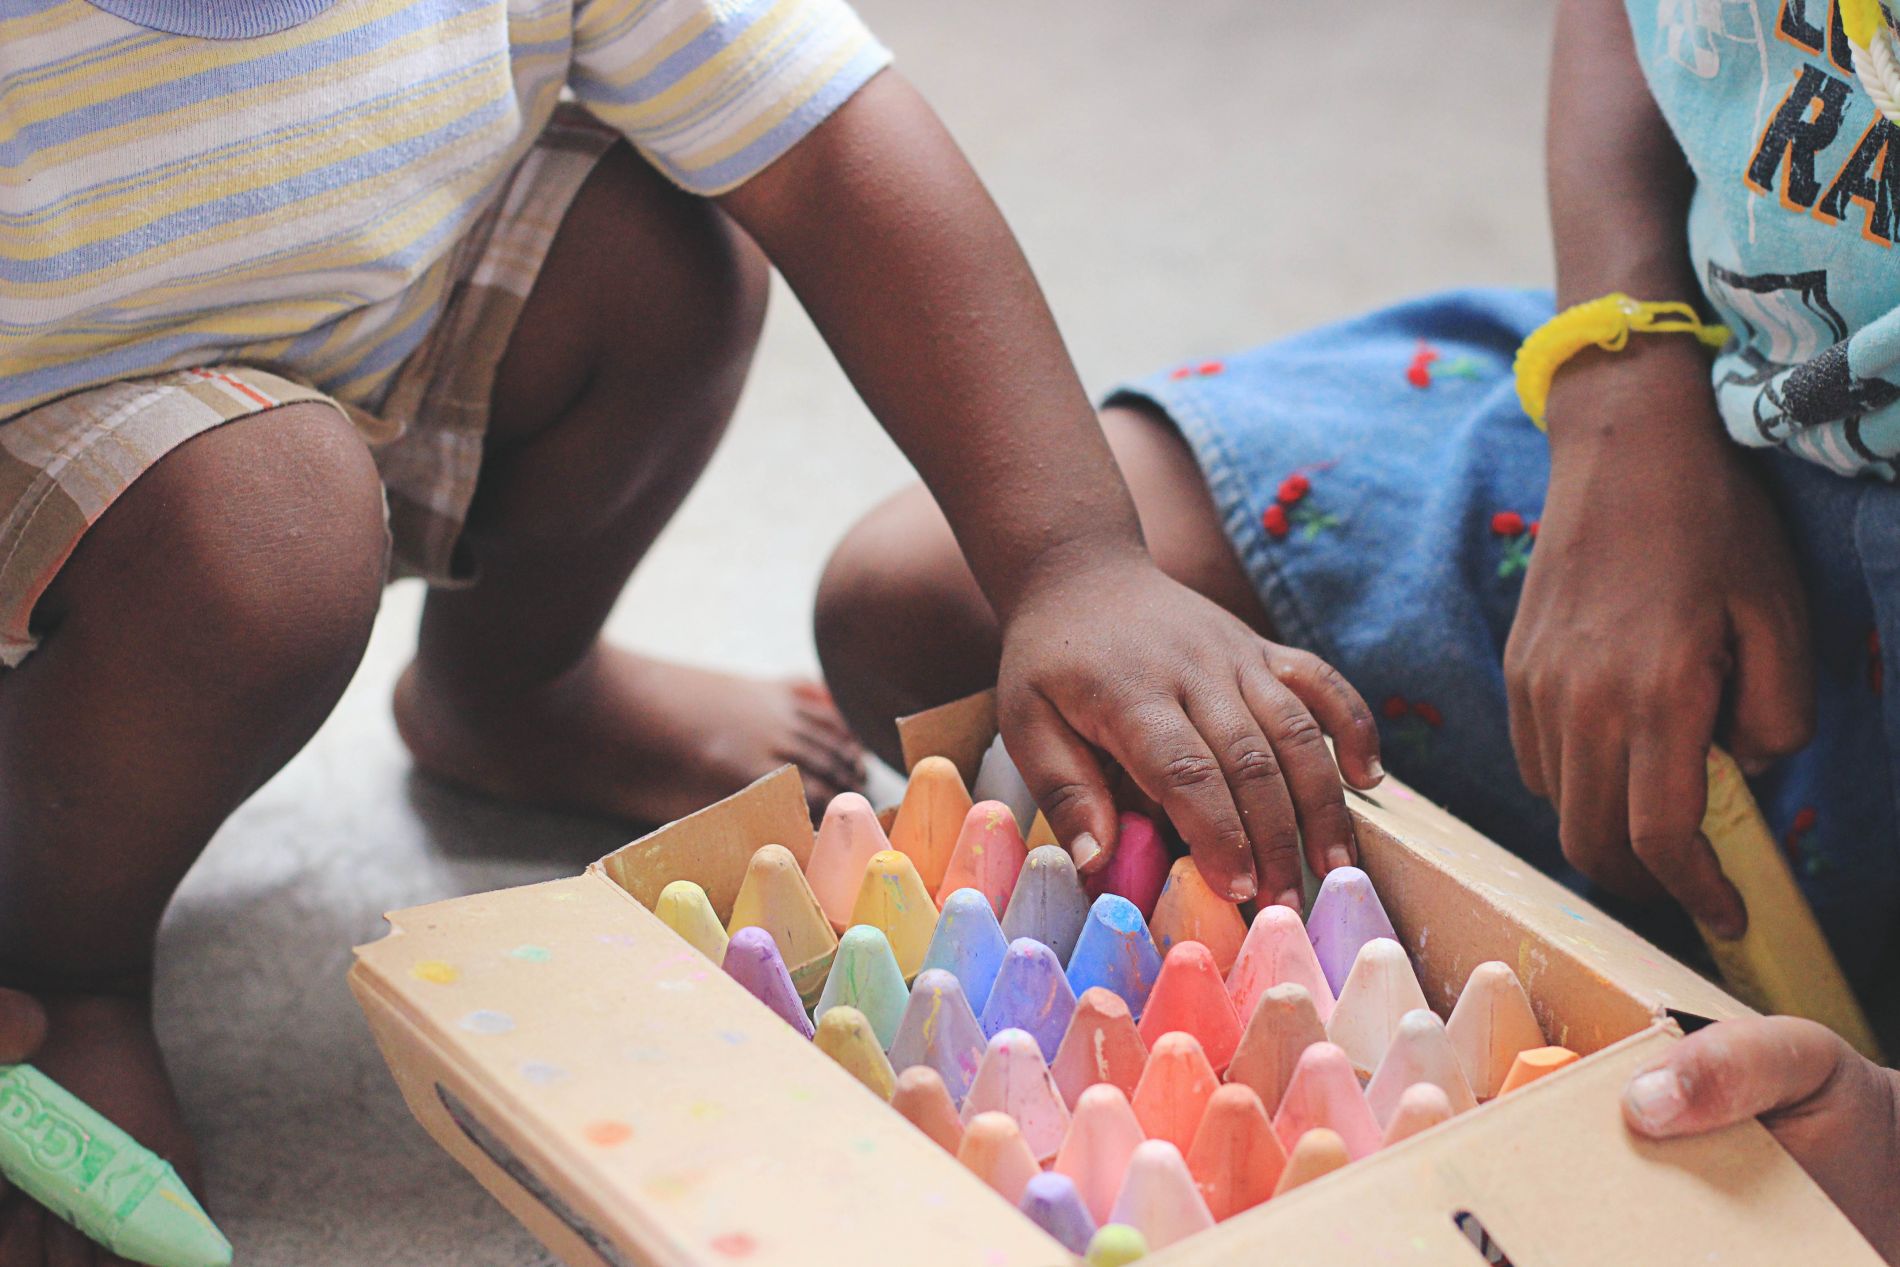 A young child looks through a box of colourful chalks next to another child holding the box